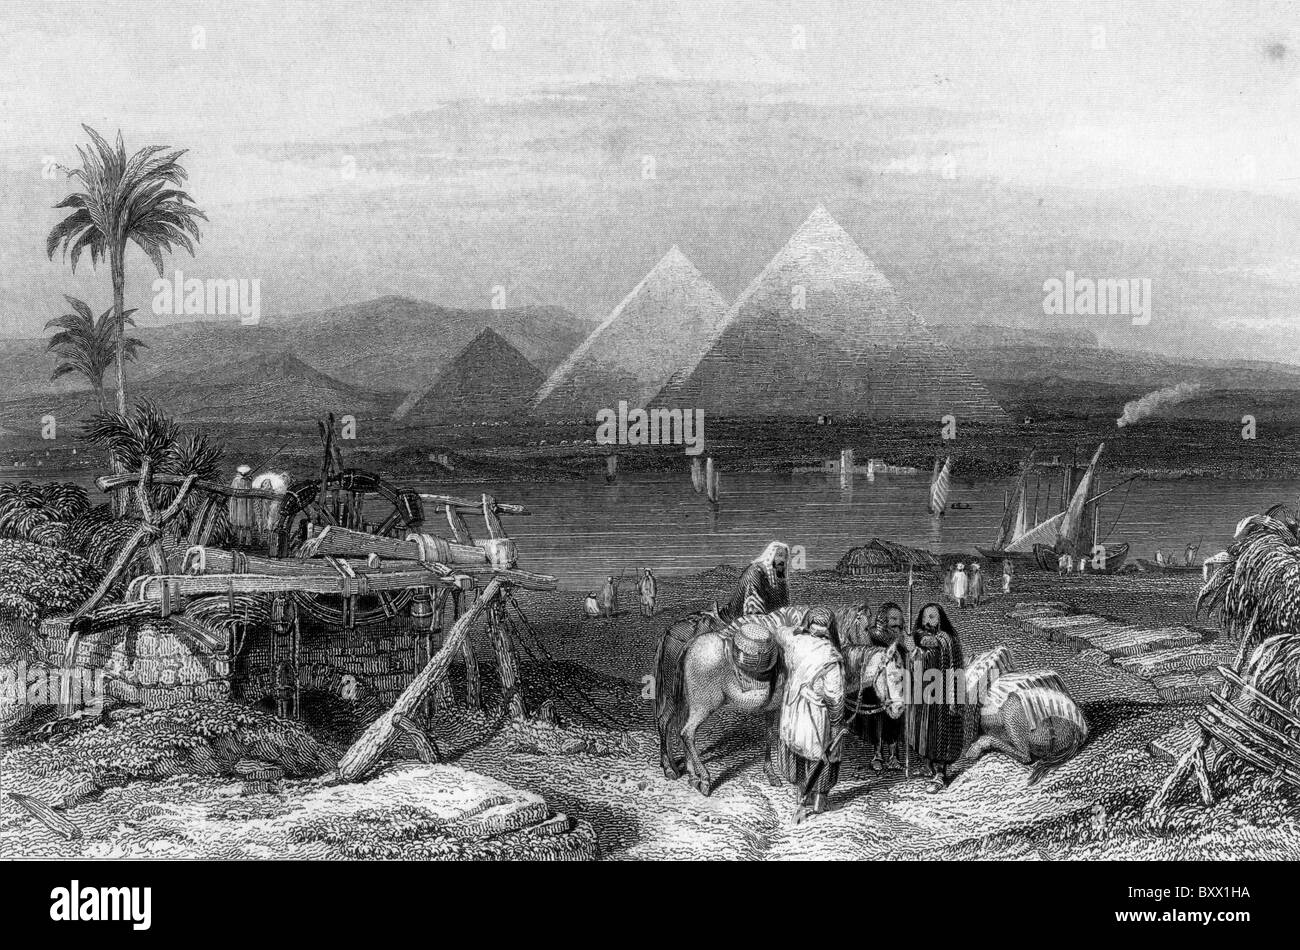 The River Nile and the Pyramids 19th century; From Landscape Illustrations of The Bible; Black and White Illustration; Stock Photo